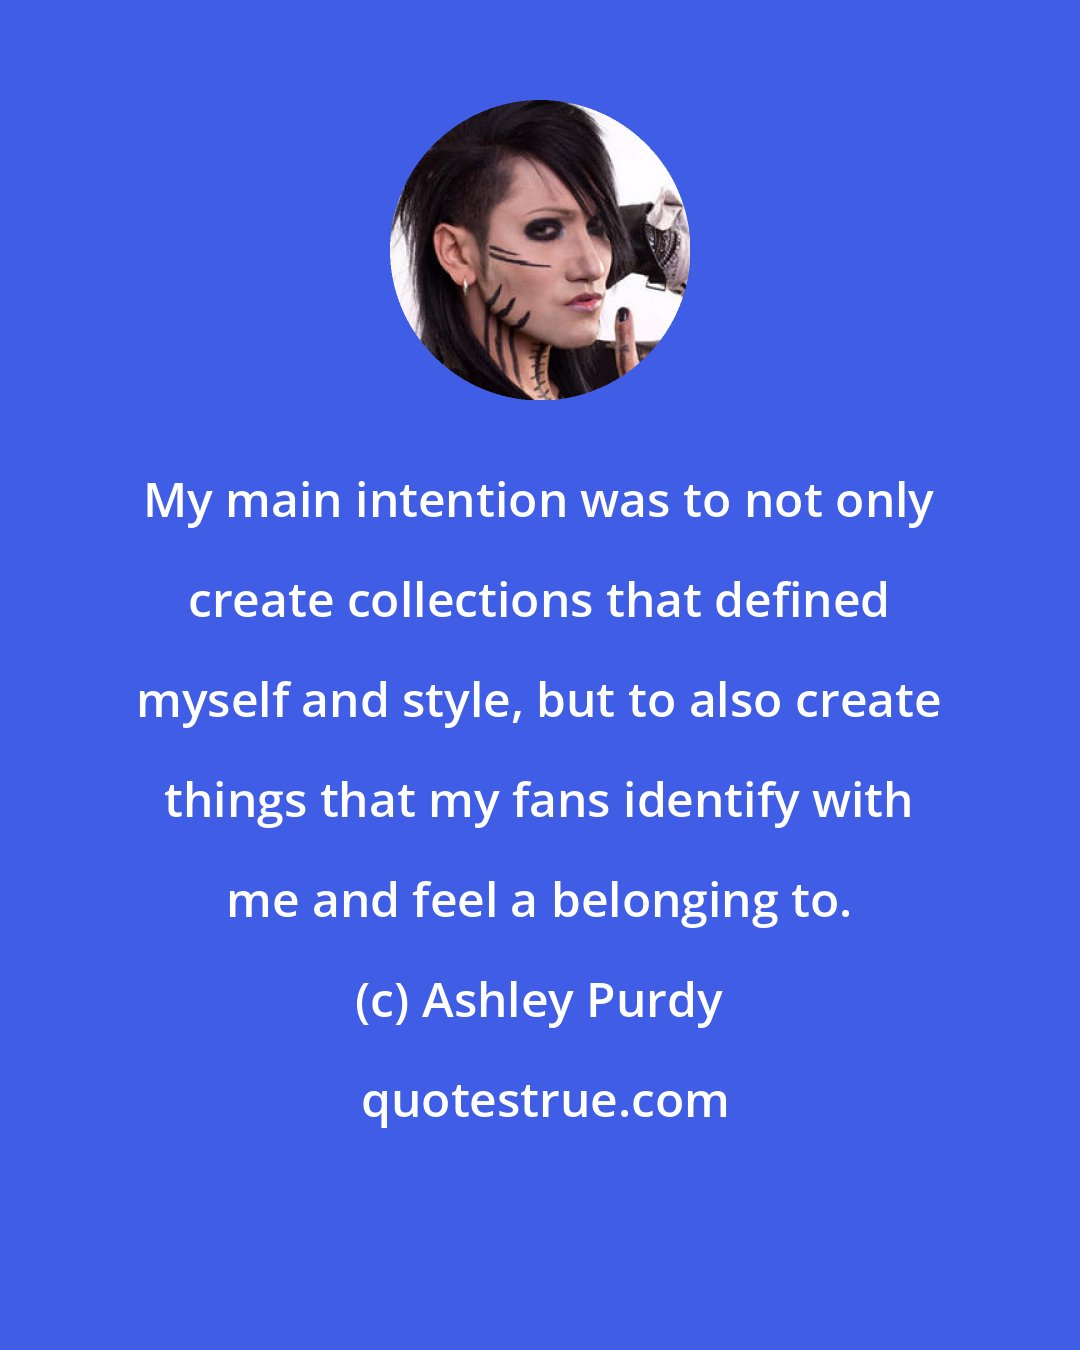 Ashley Purdy: My main intention was to not only create collections that defined myself and style, but to also create things that my fans identify with me and feel a belonging to.